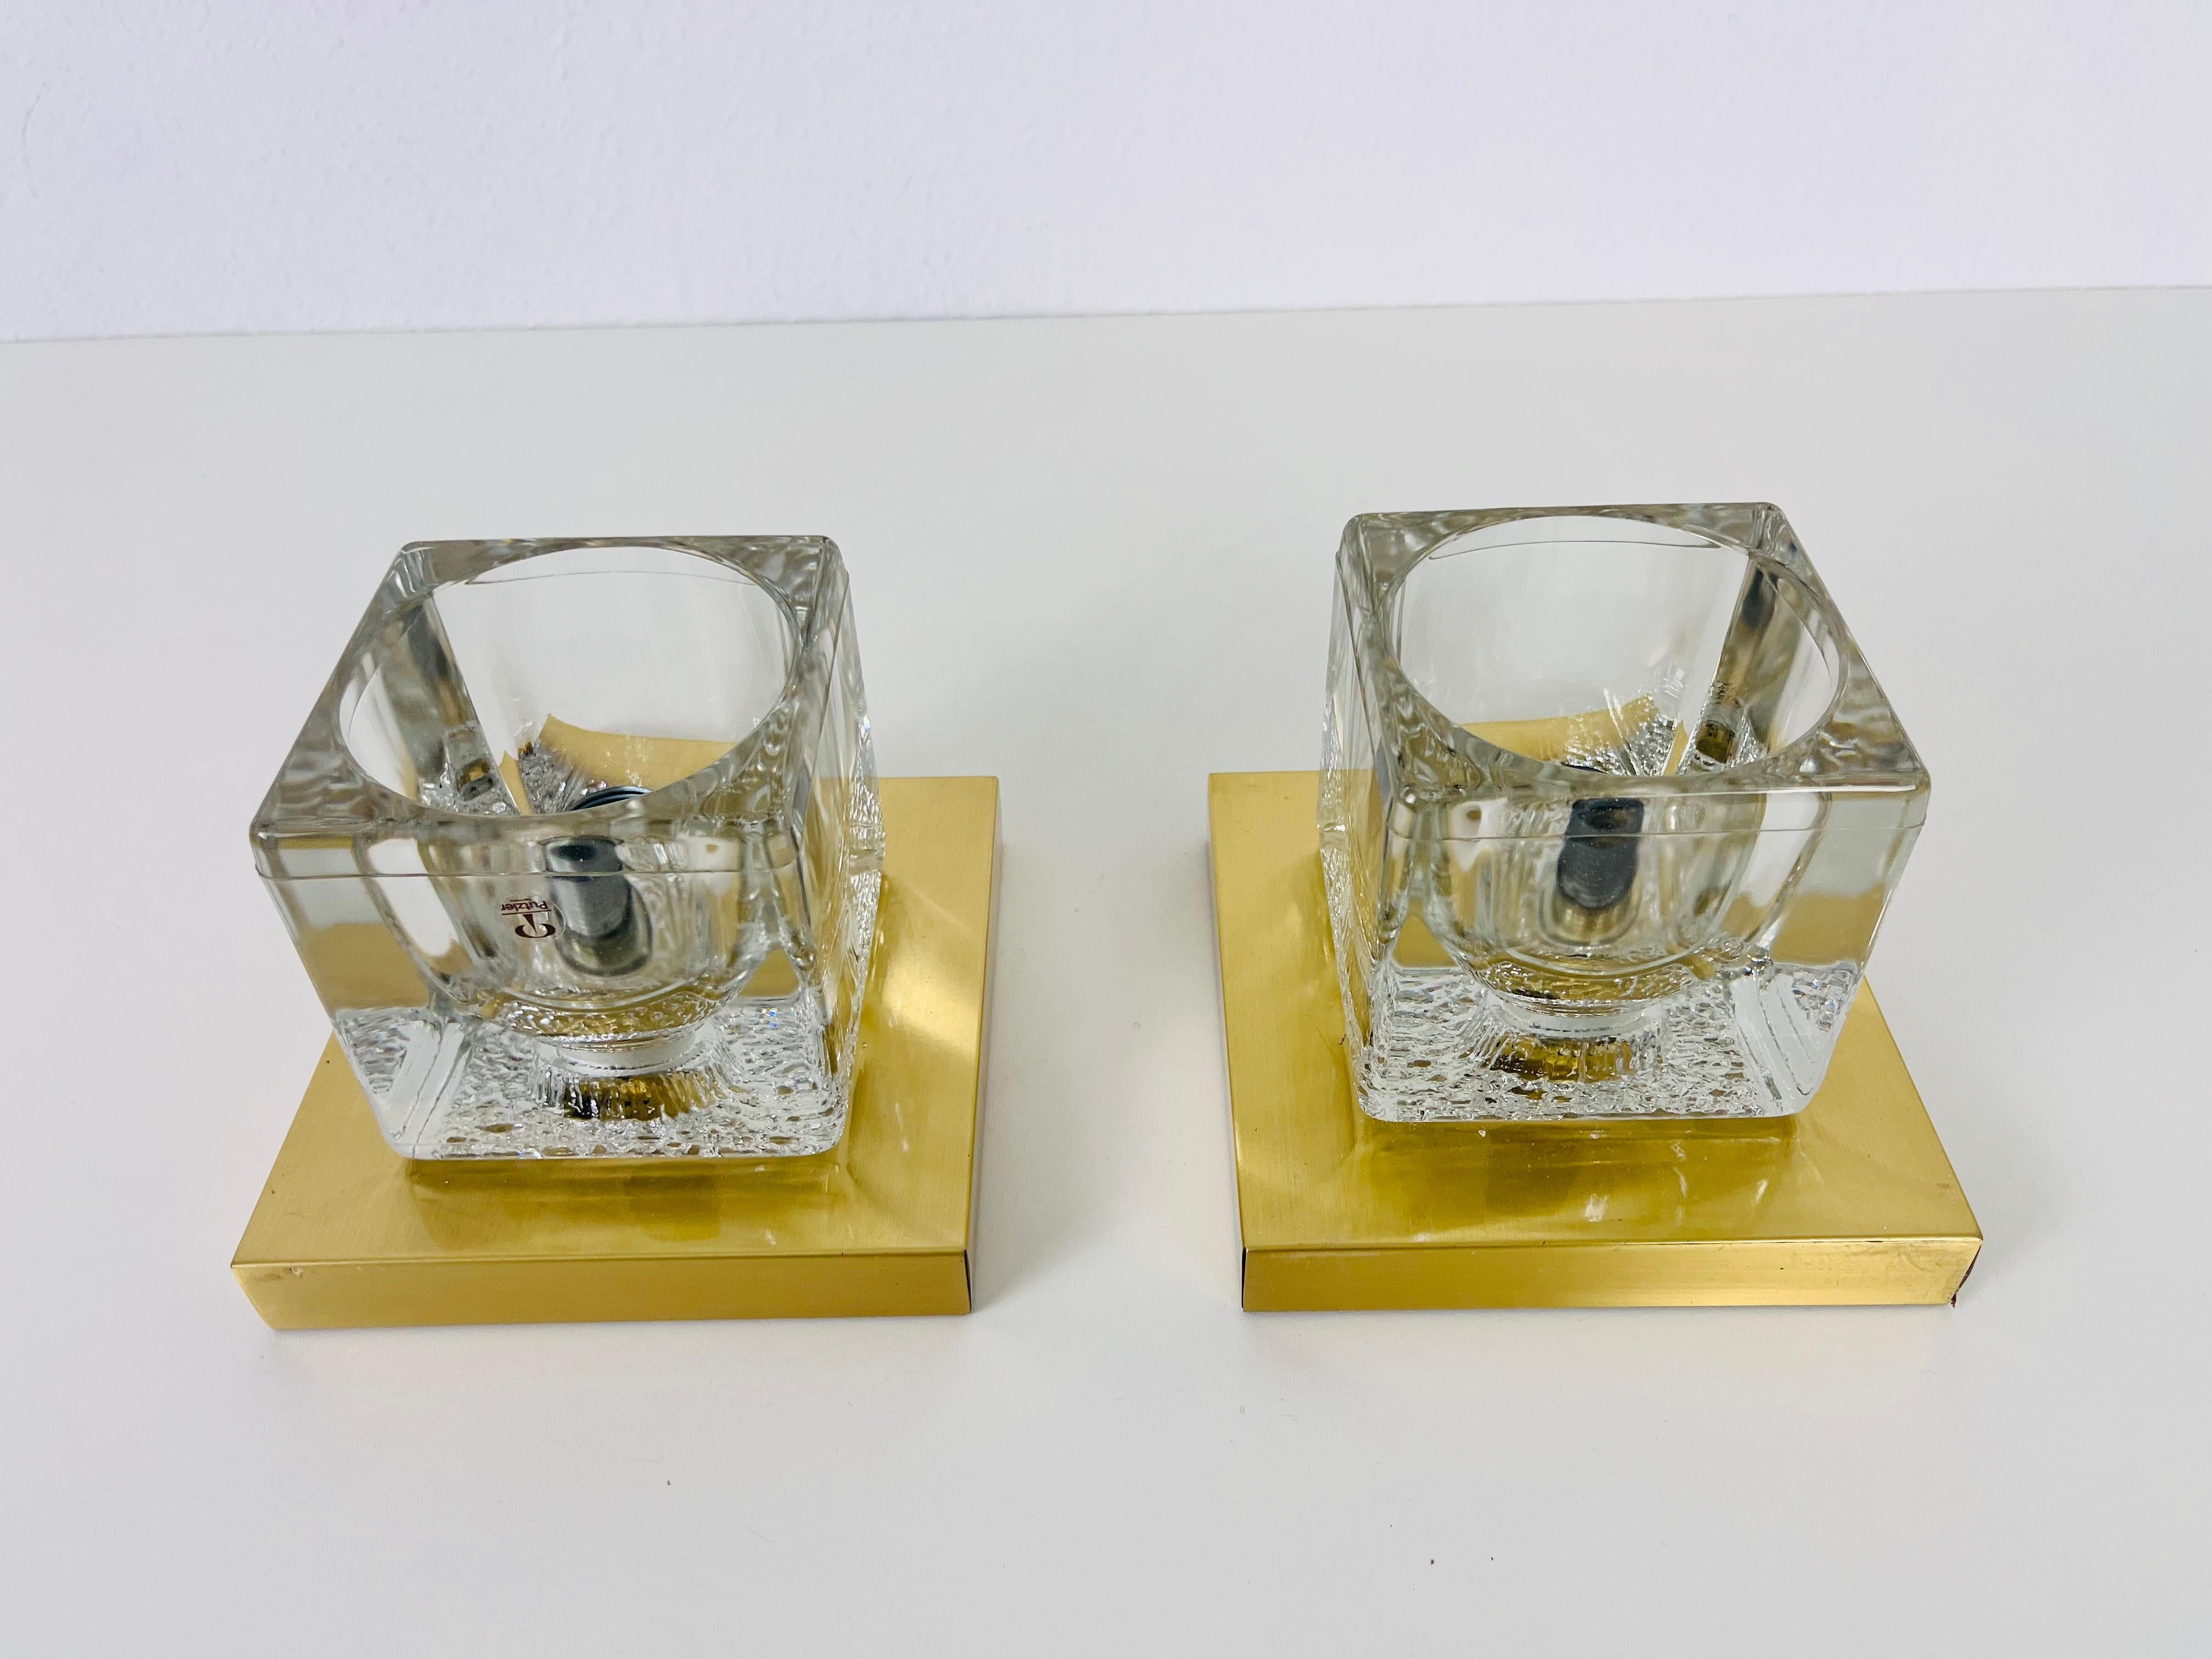 A beautiful set of wall lamps by Peill & Putzler made in Germany in the 1970s. They have a cube shape and are made of transparent ice glass with a brass base. The lightings can also used as flushmounts or table lamps. They are in very good vintage